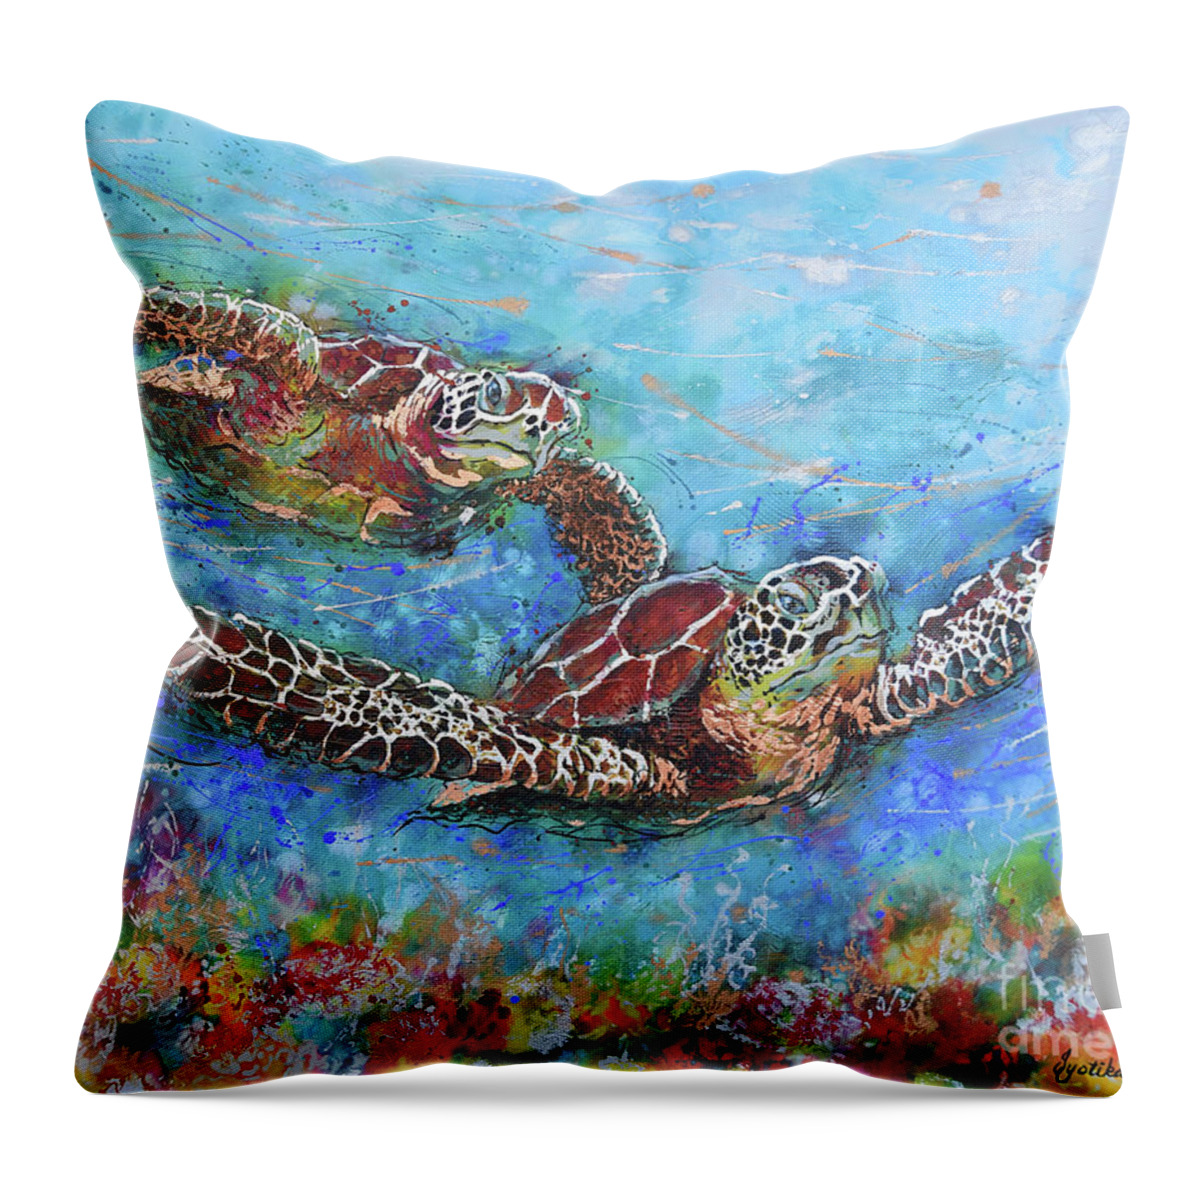 Marine Turtles Throw Pillow featuring the painting Gliding Turtles by Jyotika Shroff